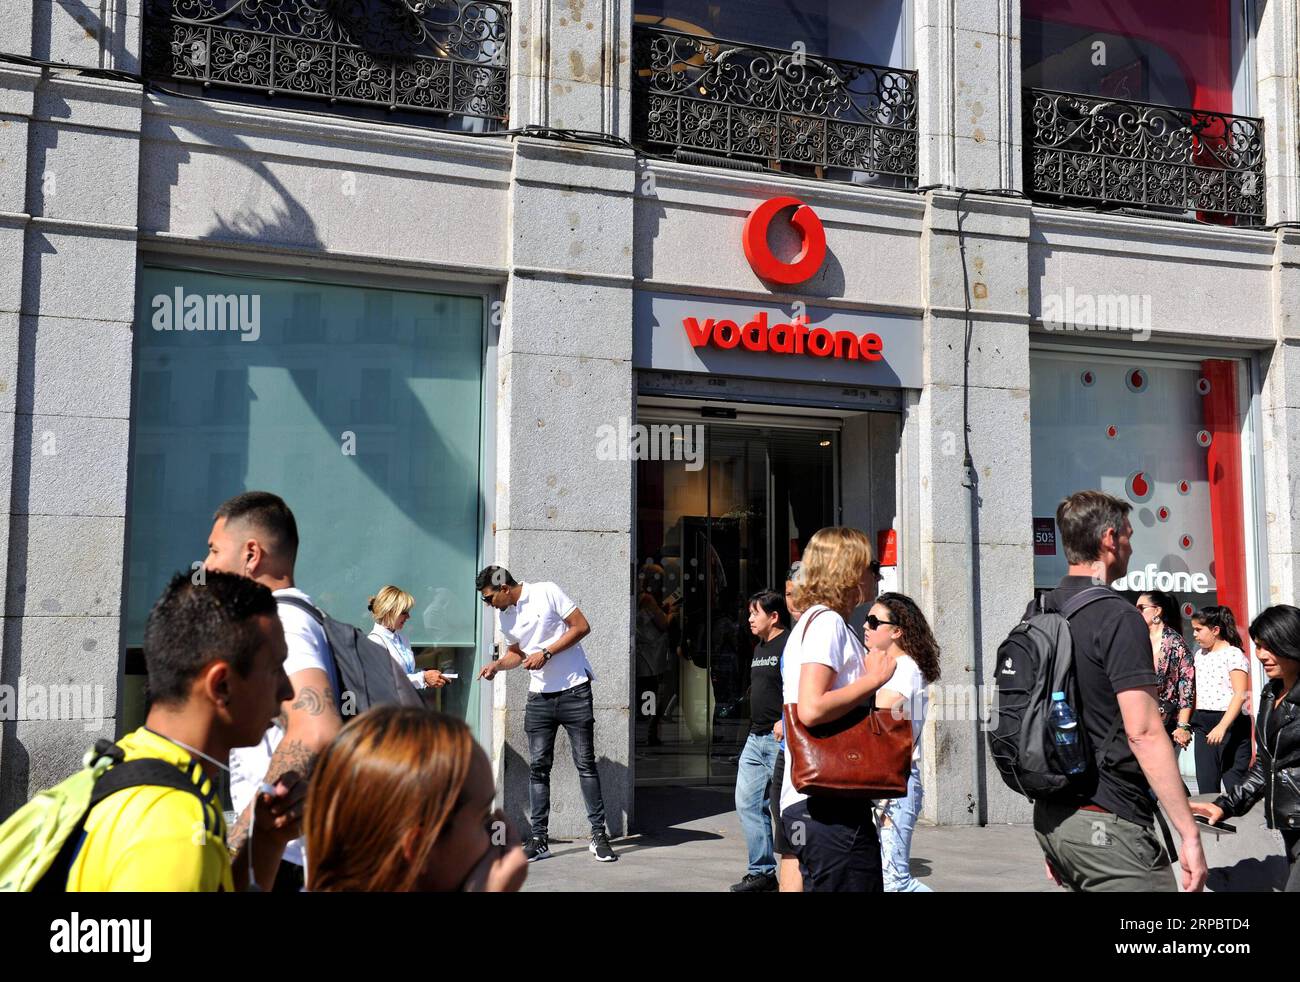 (190615) -- MADRID, June 15, 2019 (Xinhua) -- Pedestrians walk past a store of Vodafone Espana in Madrid, Spain, on June 15, 2019. In cooperation with Chinese telecom giant Huawei, Vodafone Espana on Saturday rolled out the first commercial 5G mobile services in Spain, making it one of the first European countries with the ultrafast mobile network in Europe. (Xinhua/Guo Qiuda) SPAIN-MADRID-VODAFONE-HUAWEI-FIRST 5G NETWORK PUBLICATIONxNOTxINxCHN Stock Photo